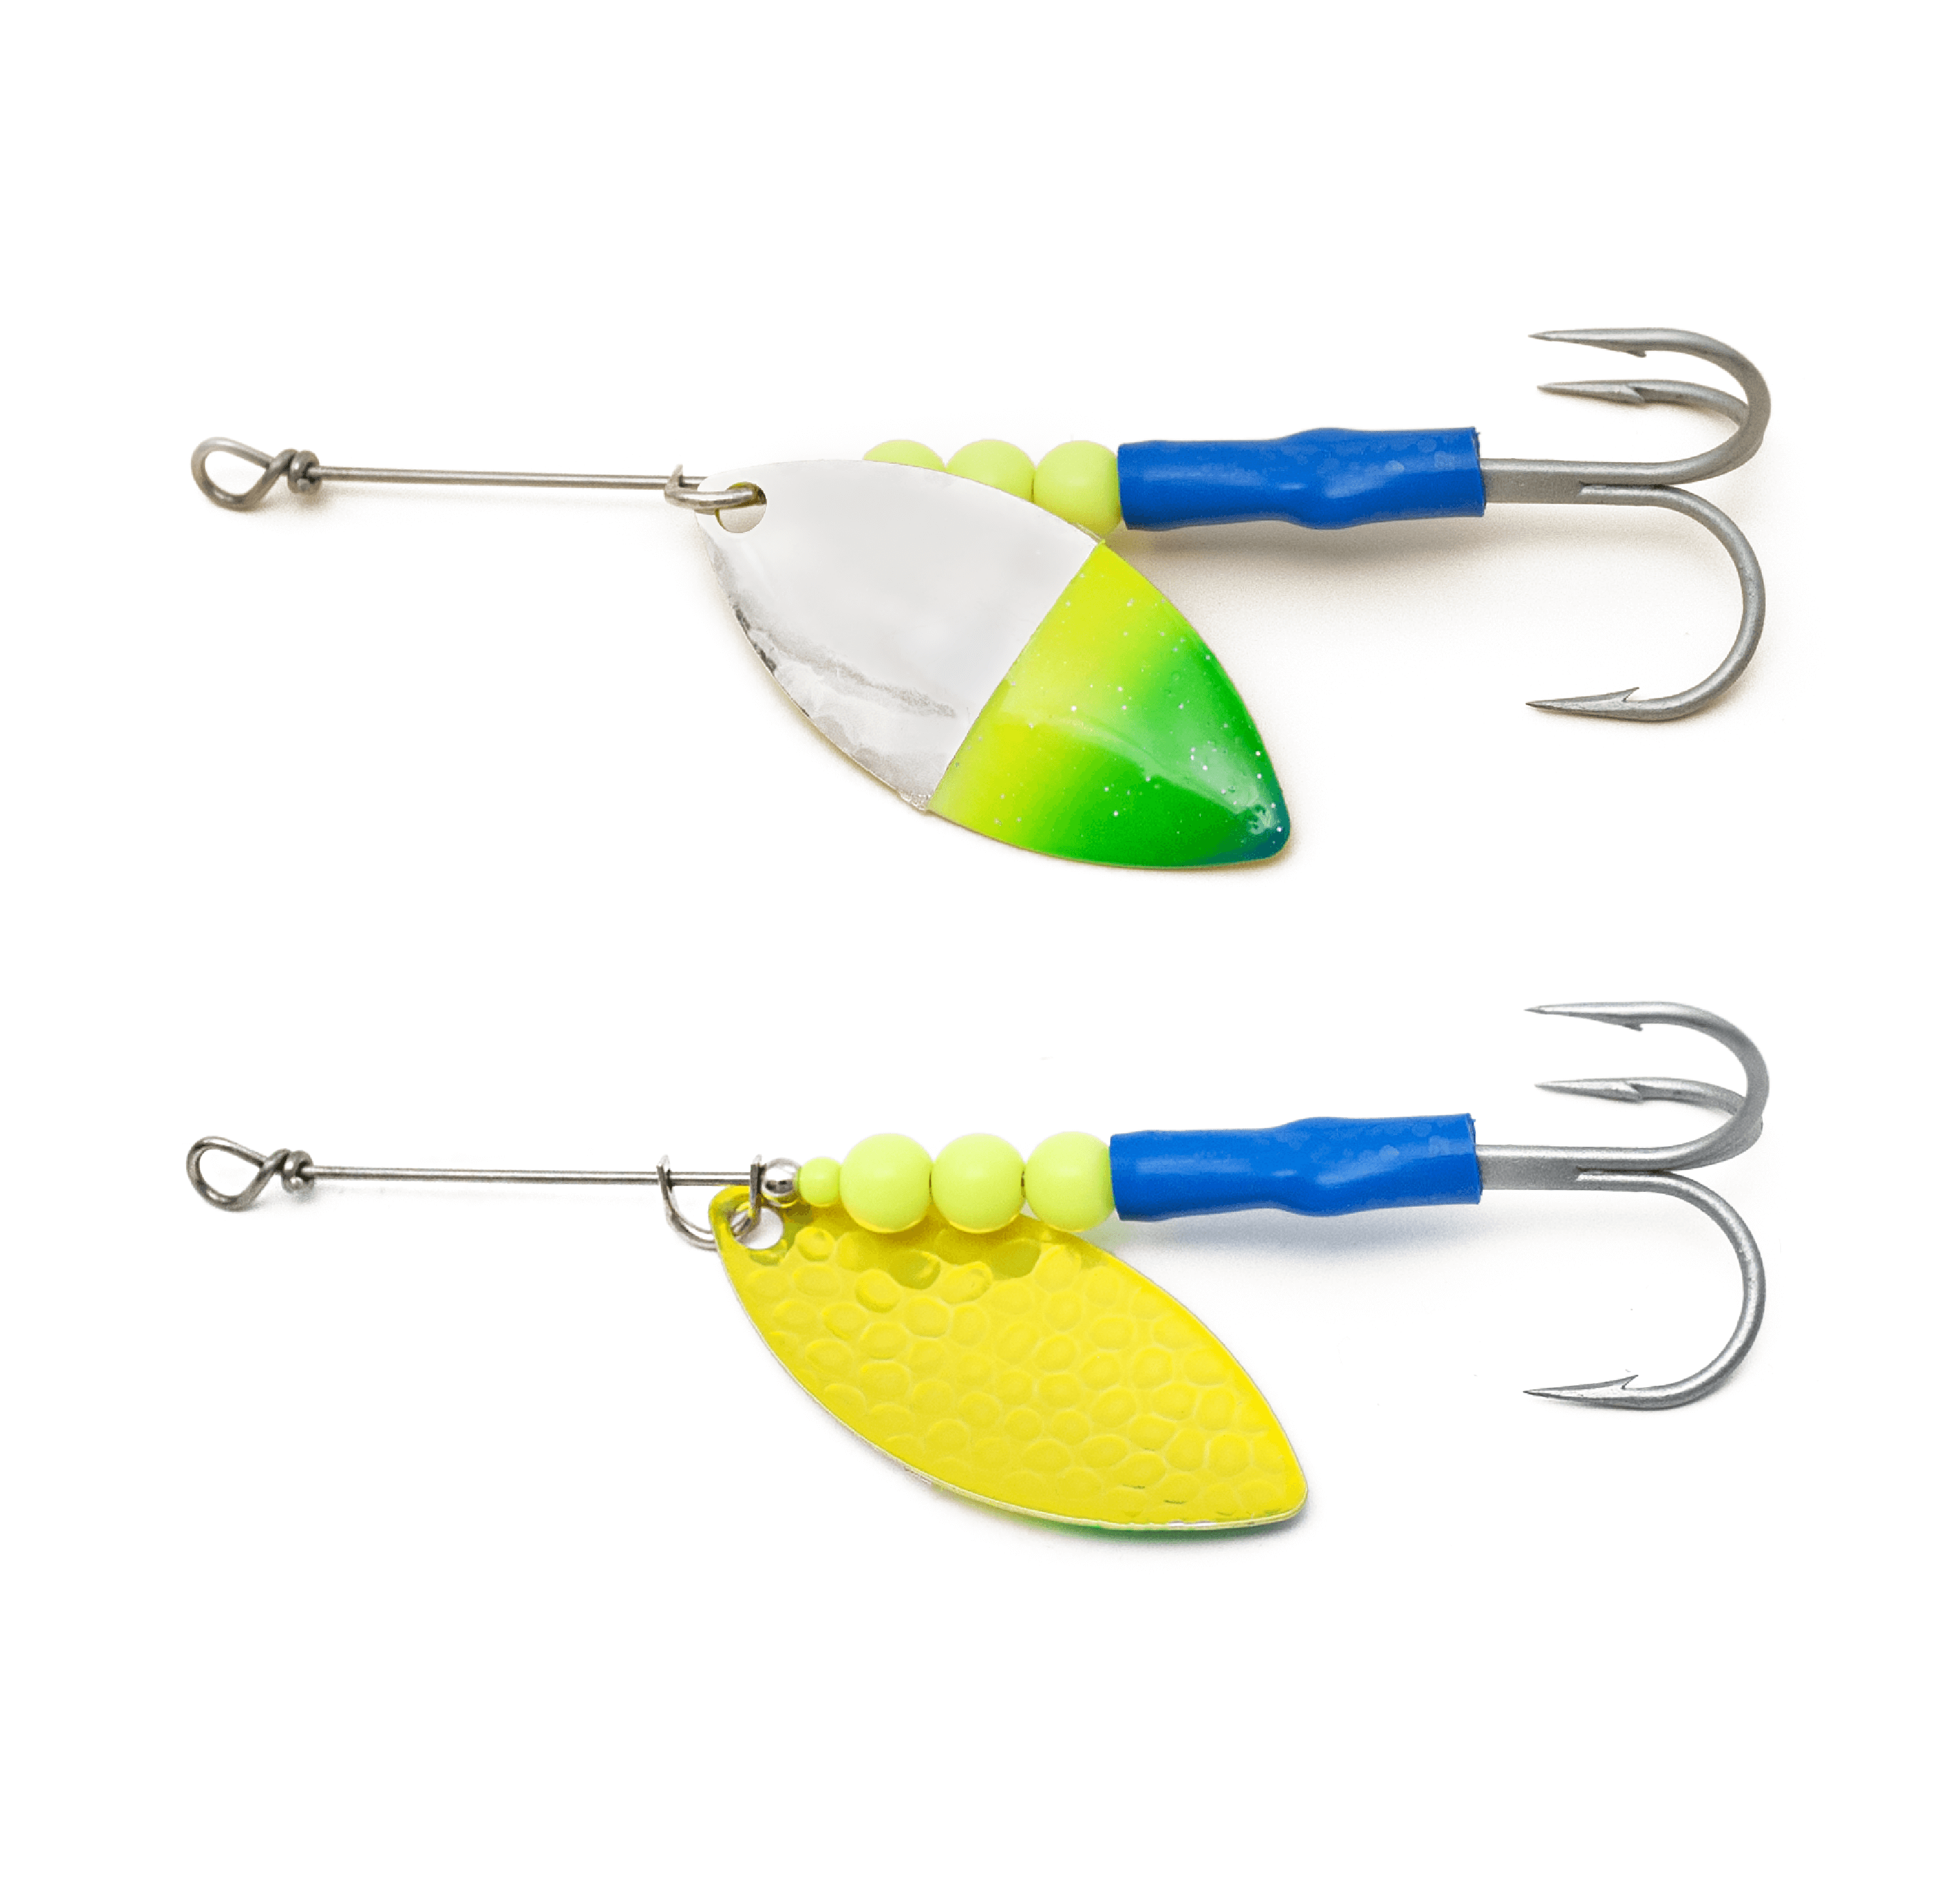 Salmon Steelhead Fishing Spinners for trolling or casting.